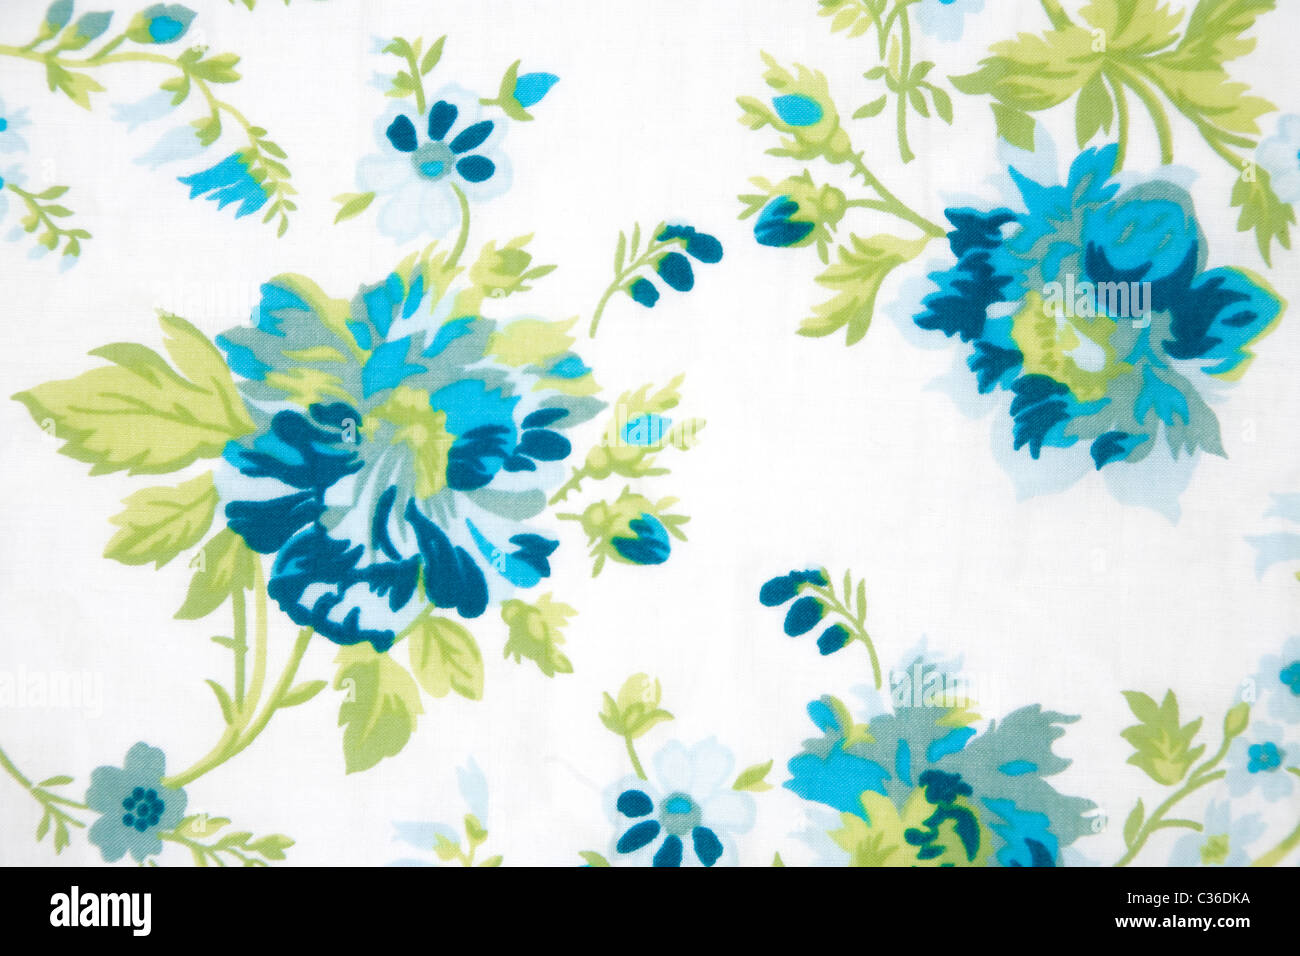 flower fabric texture, green plants on white background Stock Photo